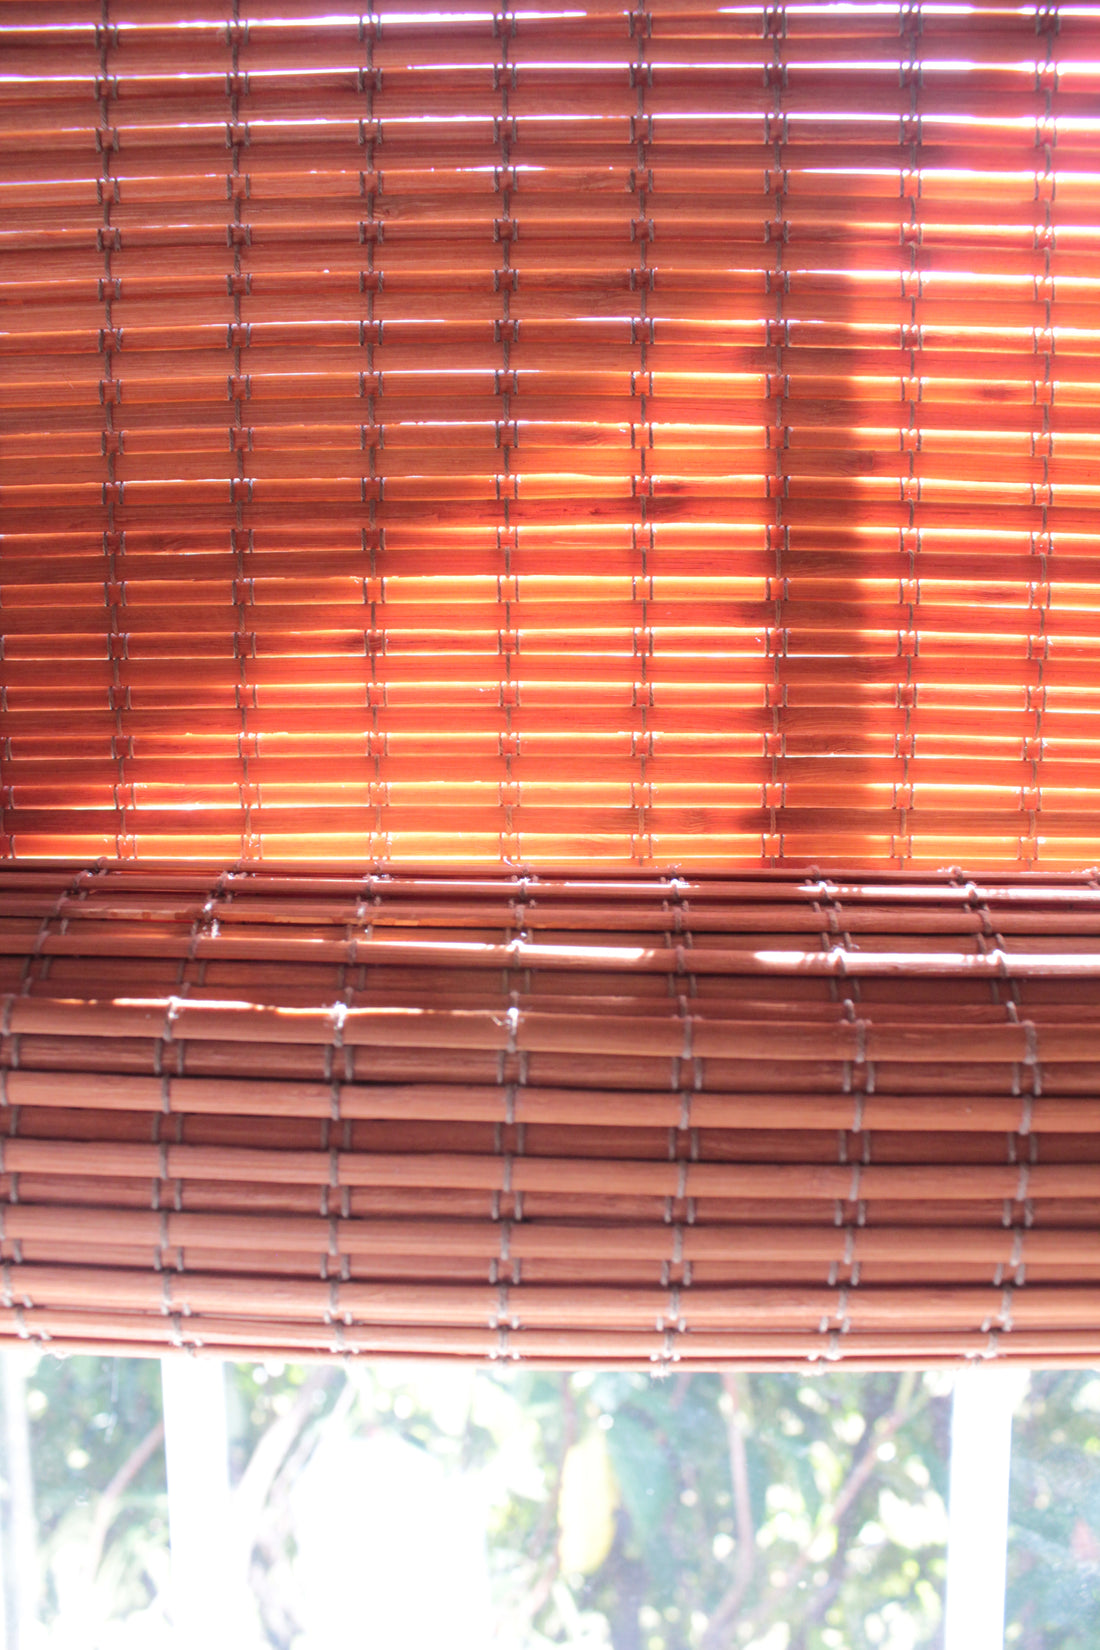 Sun filtering shade by minimizing gaps between slats; however, is not a privacy blind.